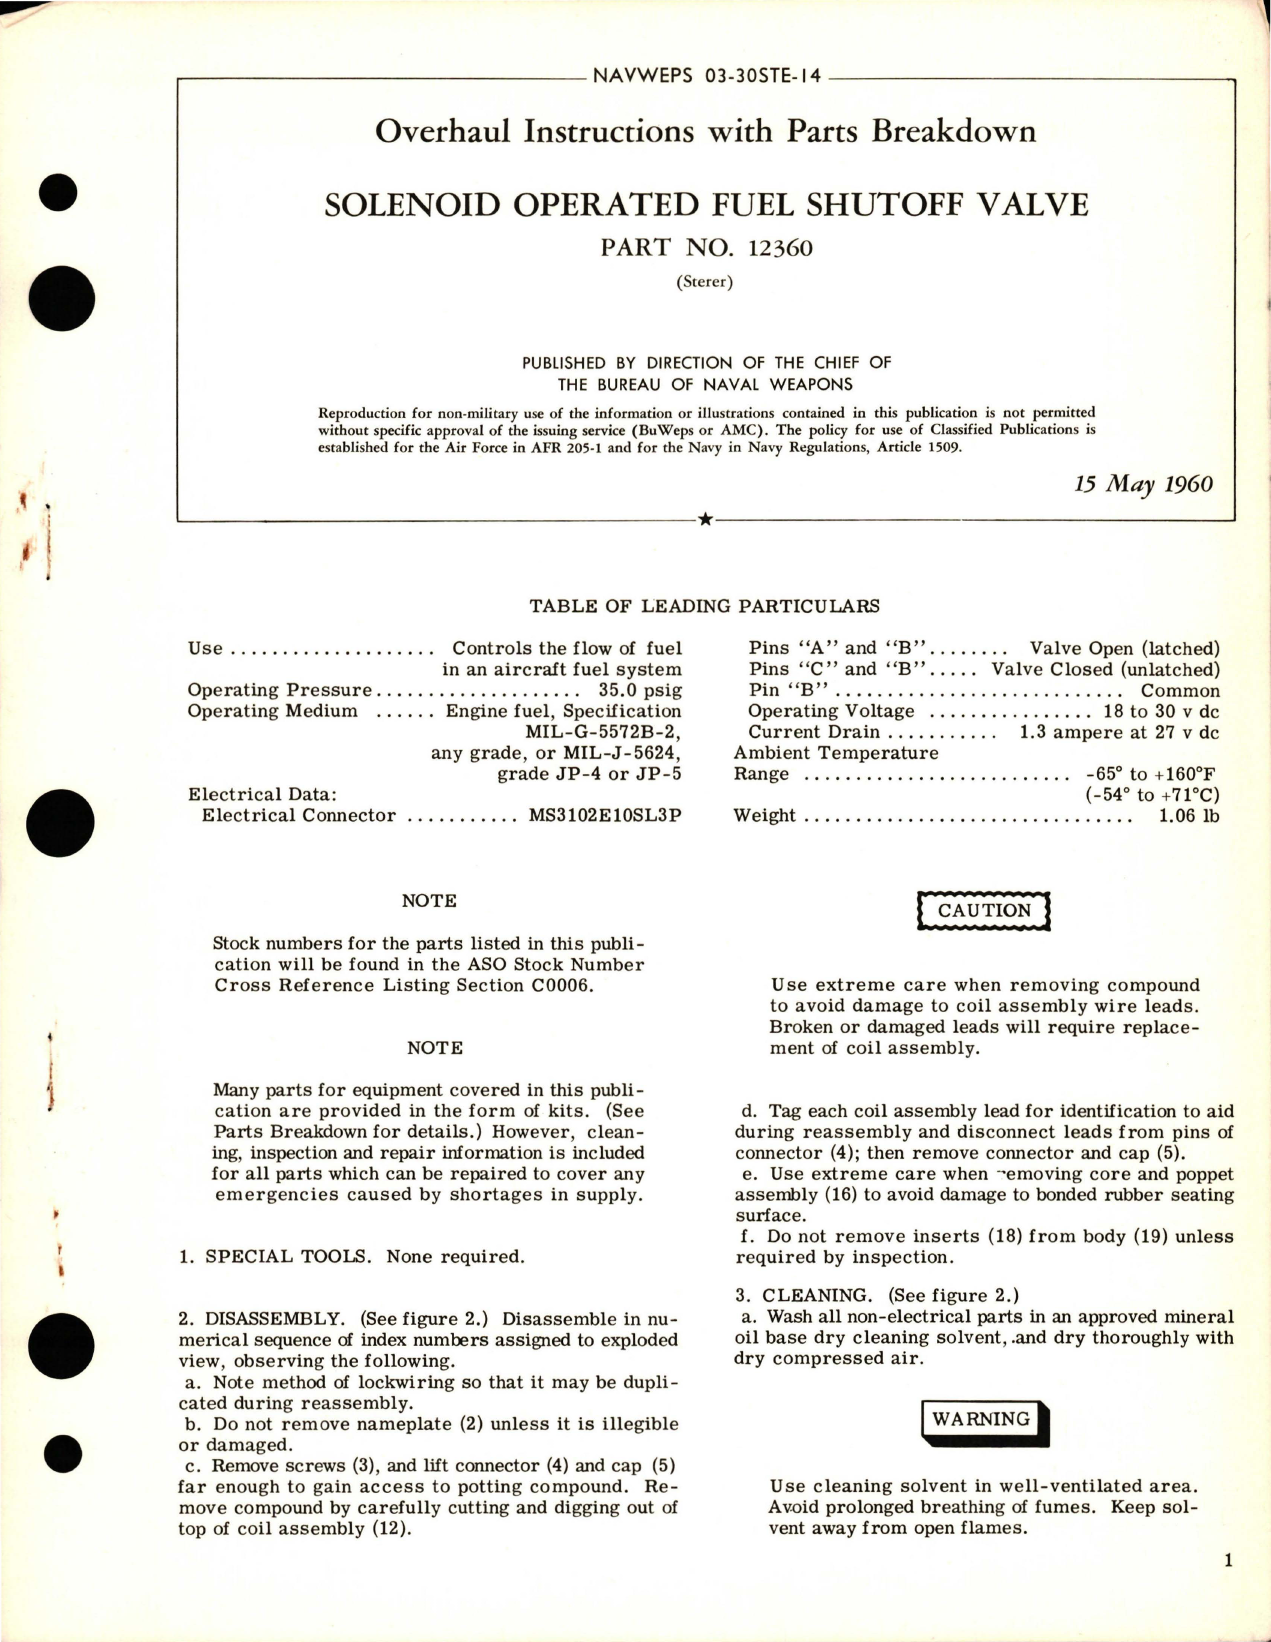 Sample page 1 from AirCorps Library document: Overhaul Instructions with Parts Breakdown for Solenoid Operated Fuel Shutoff Valve - Part 12360